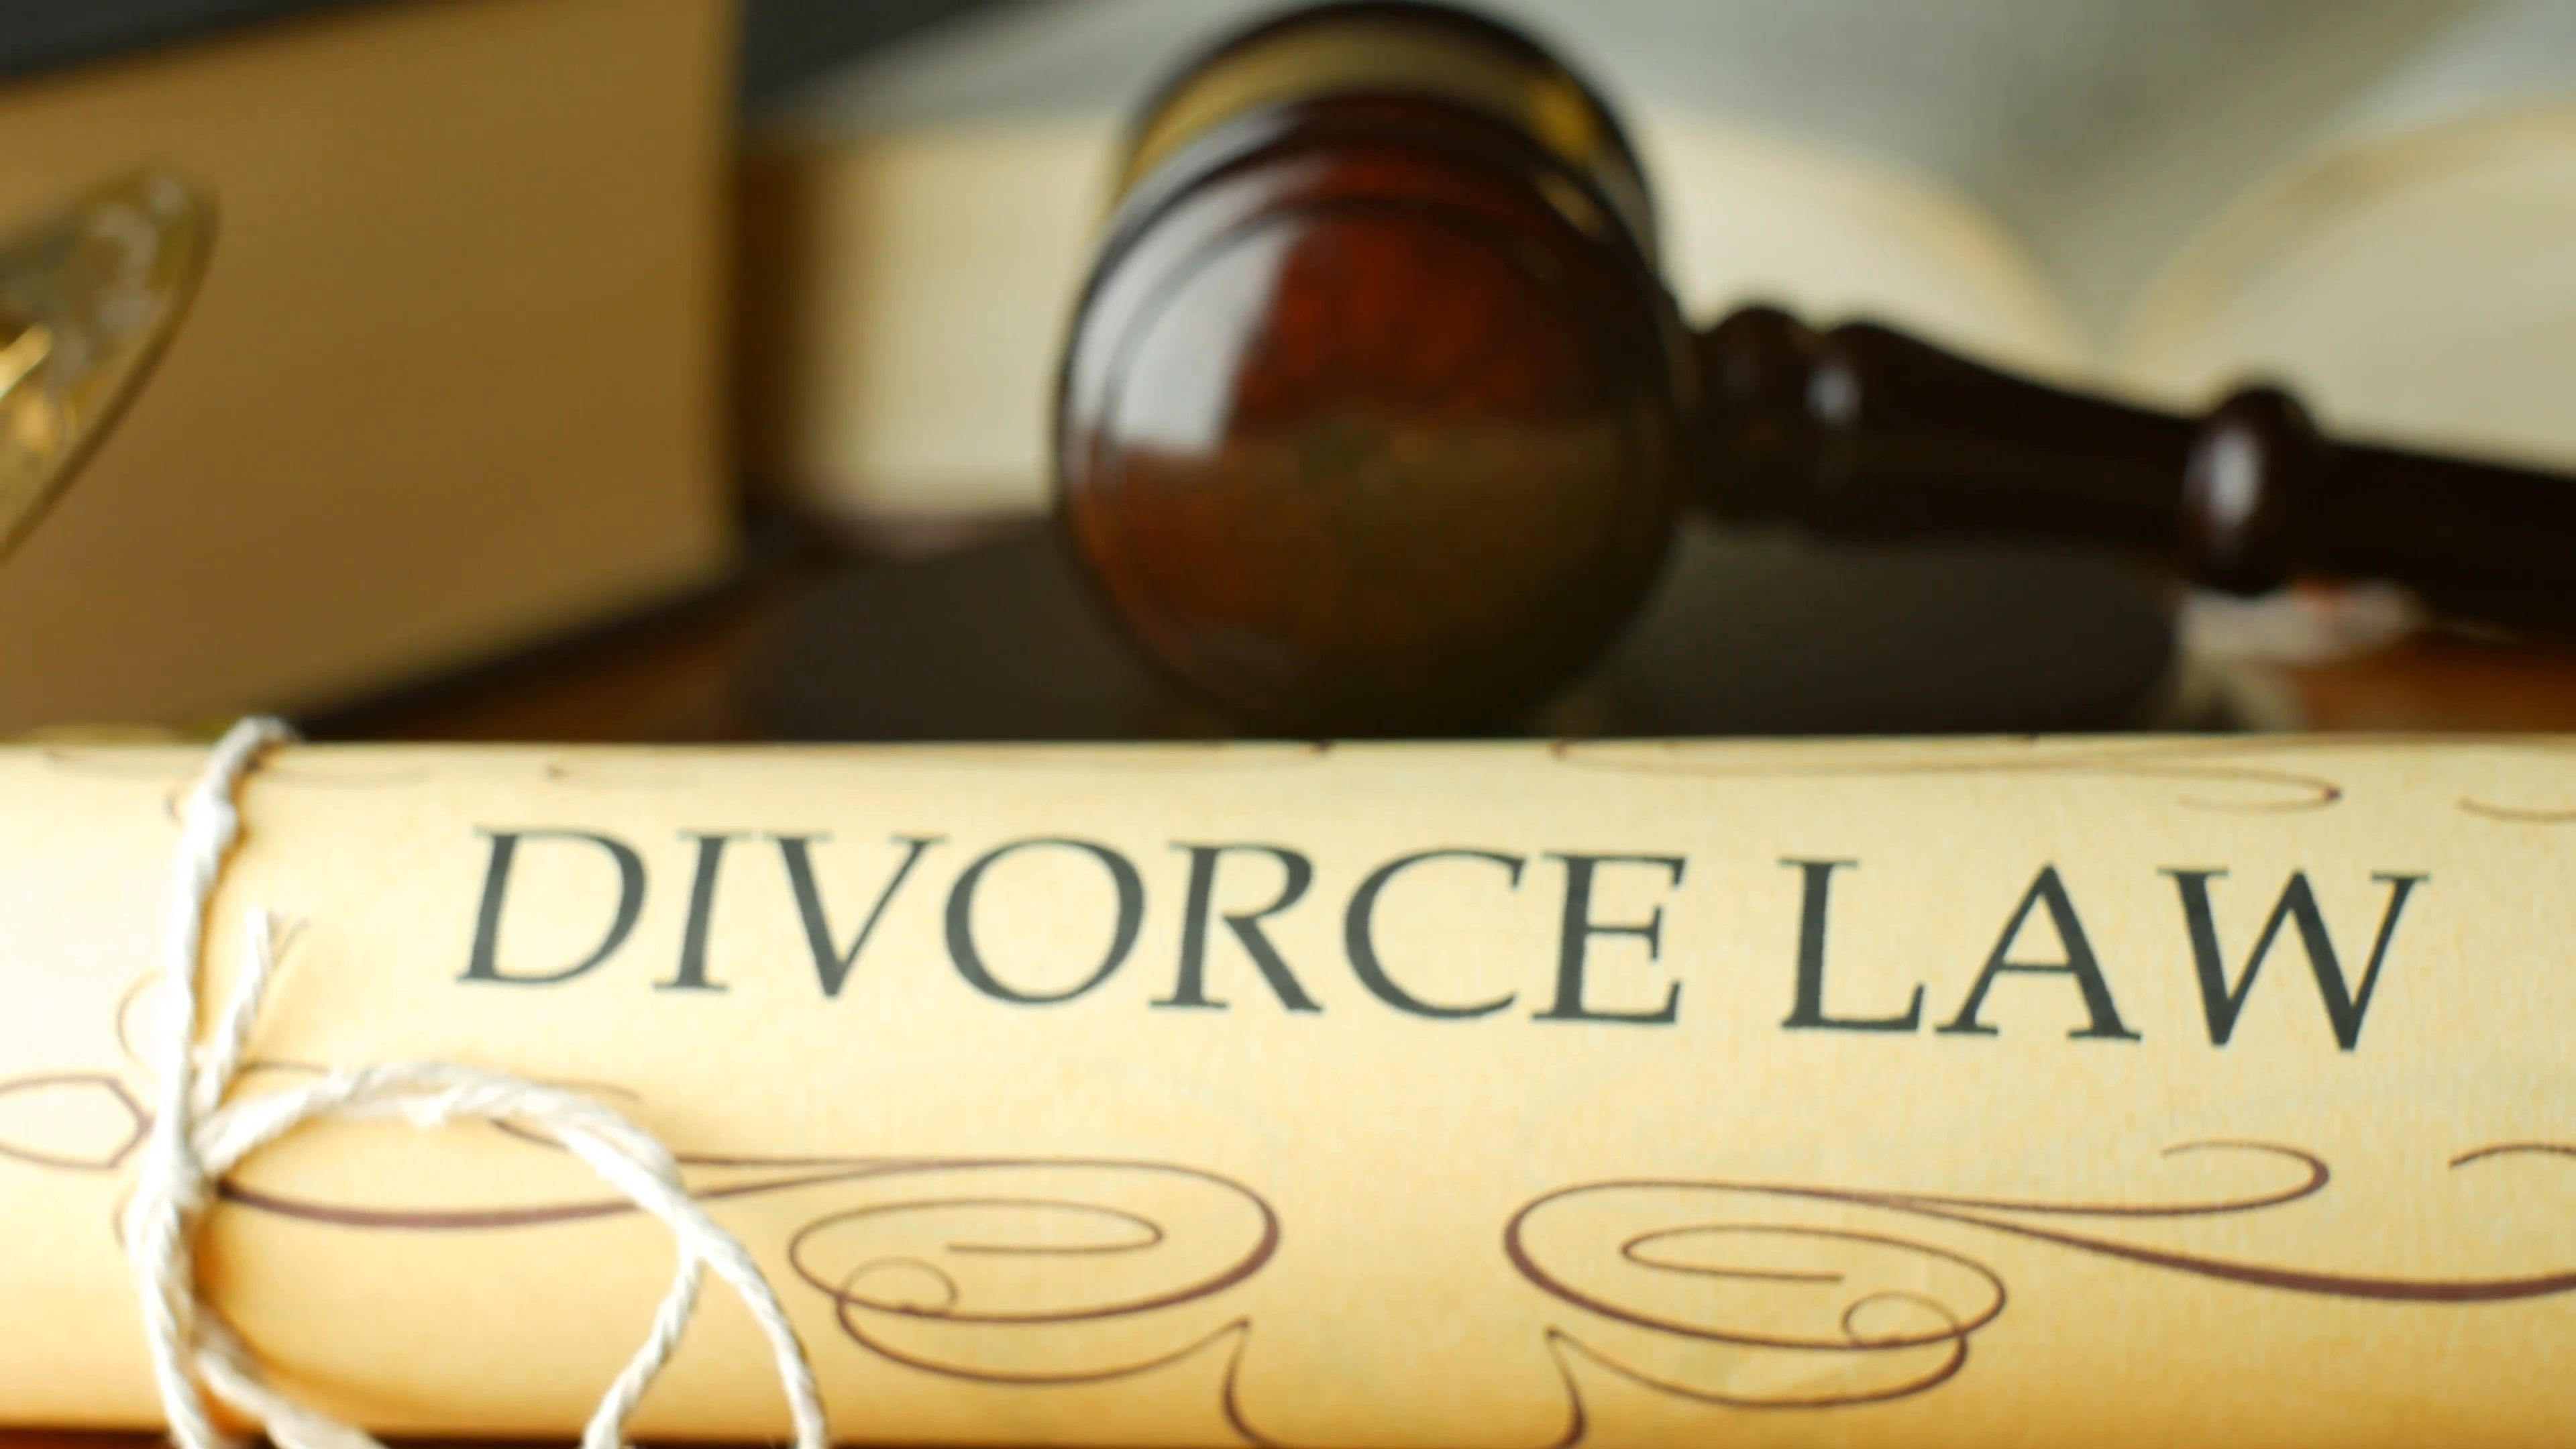 divorce lawyers in nyc for cheap